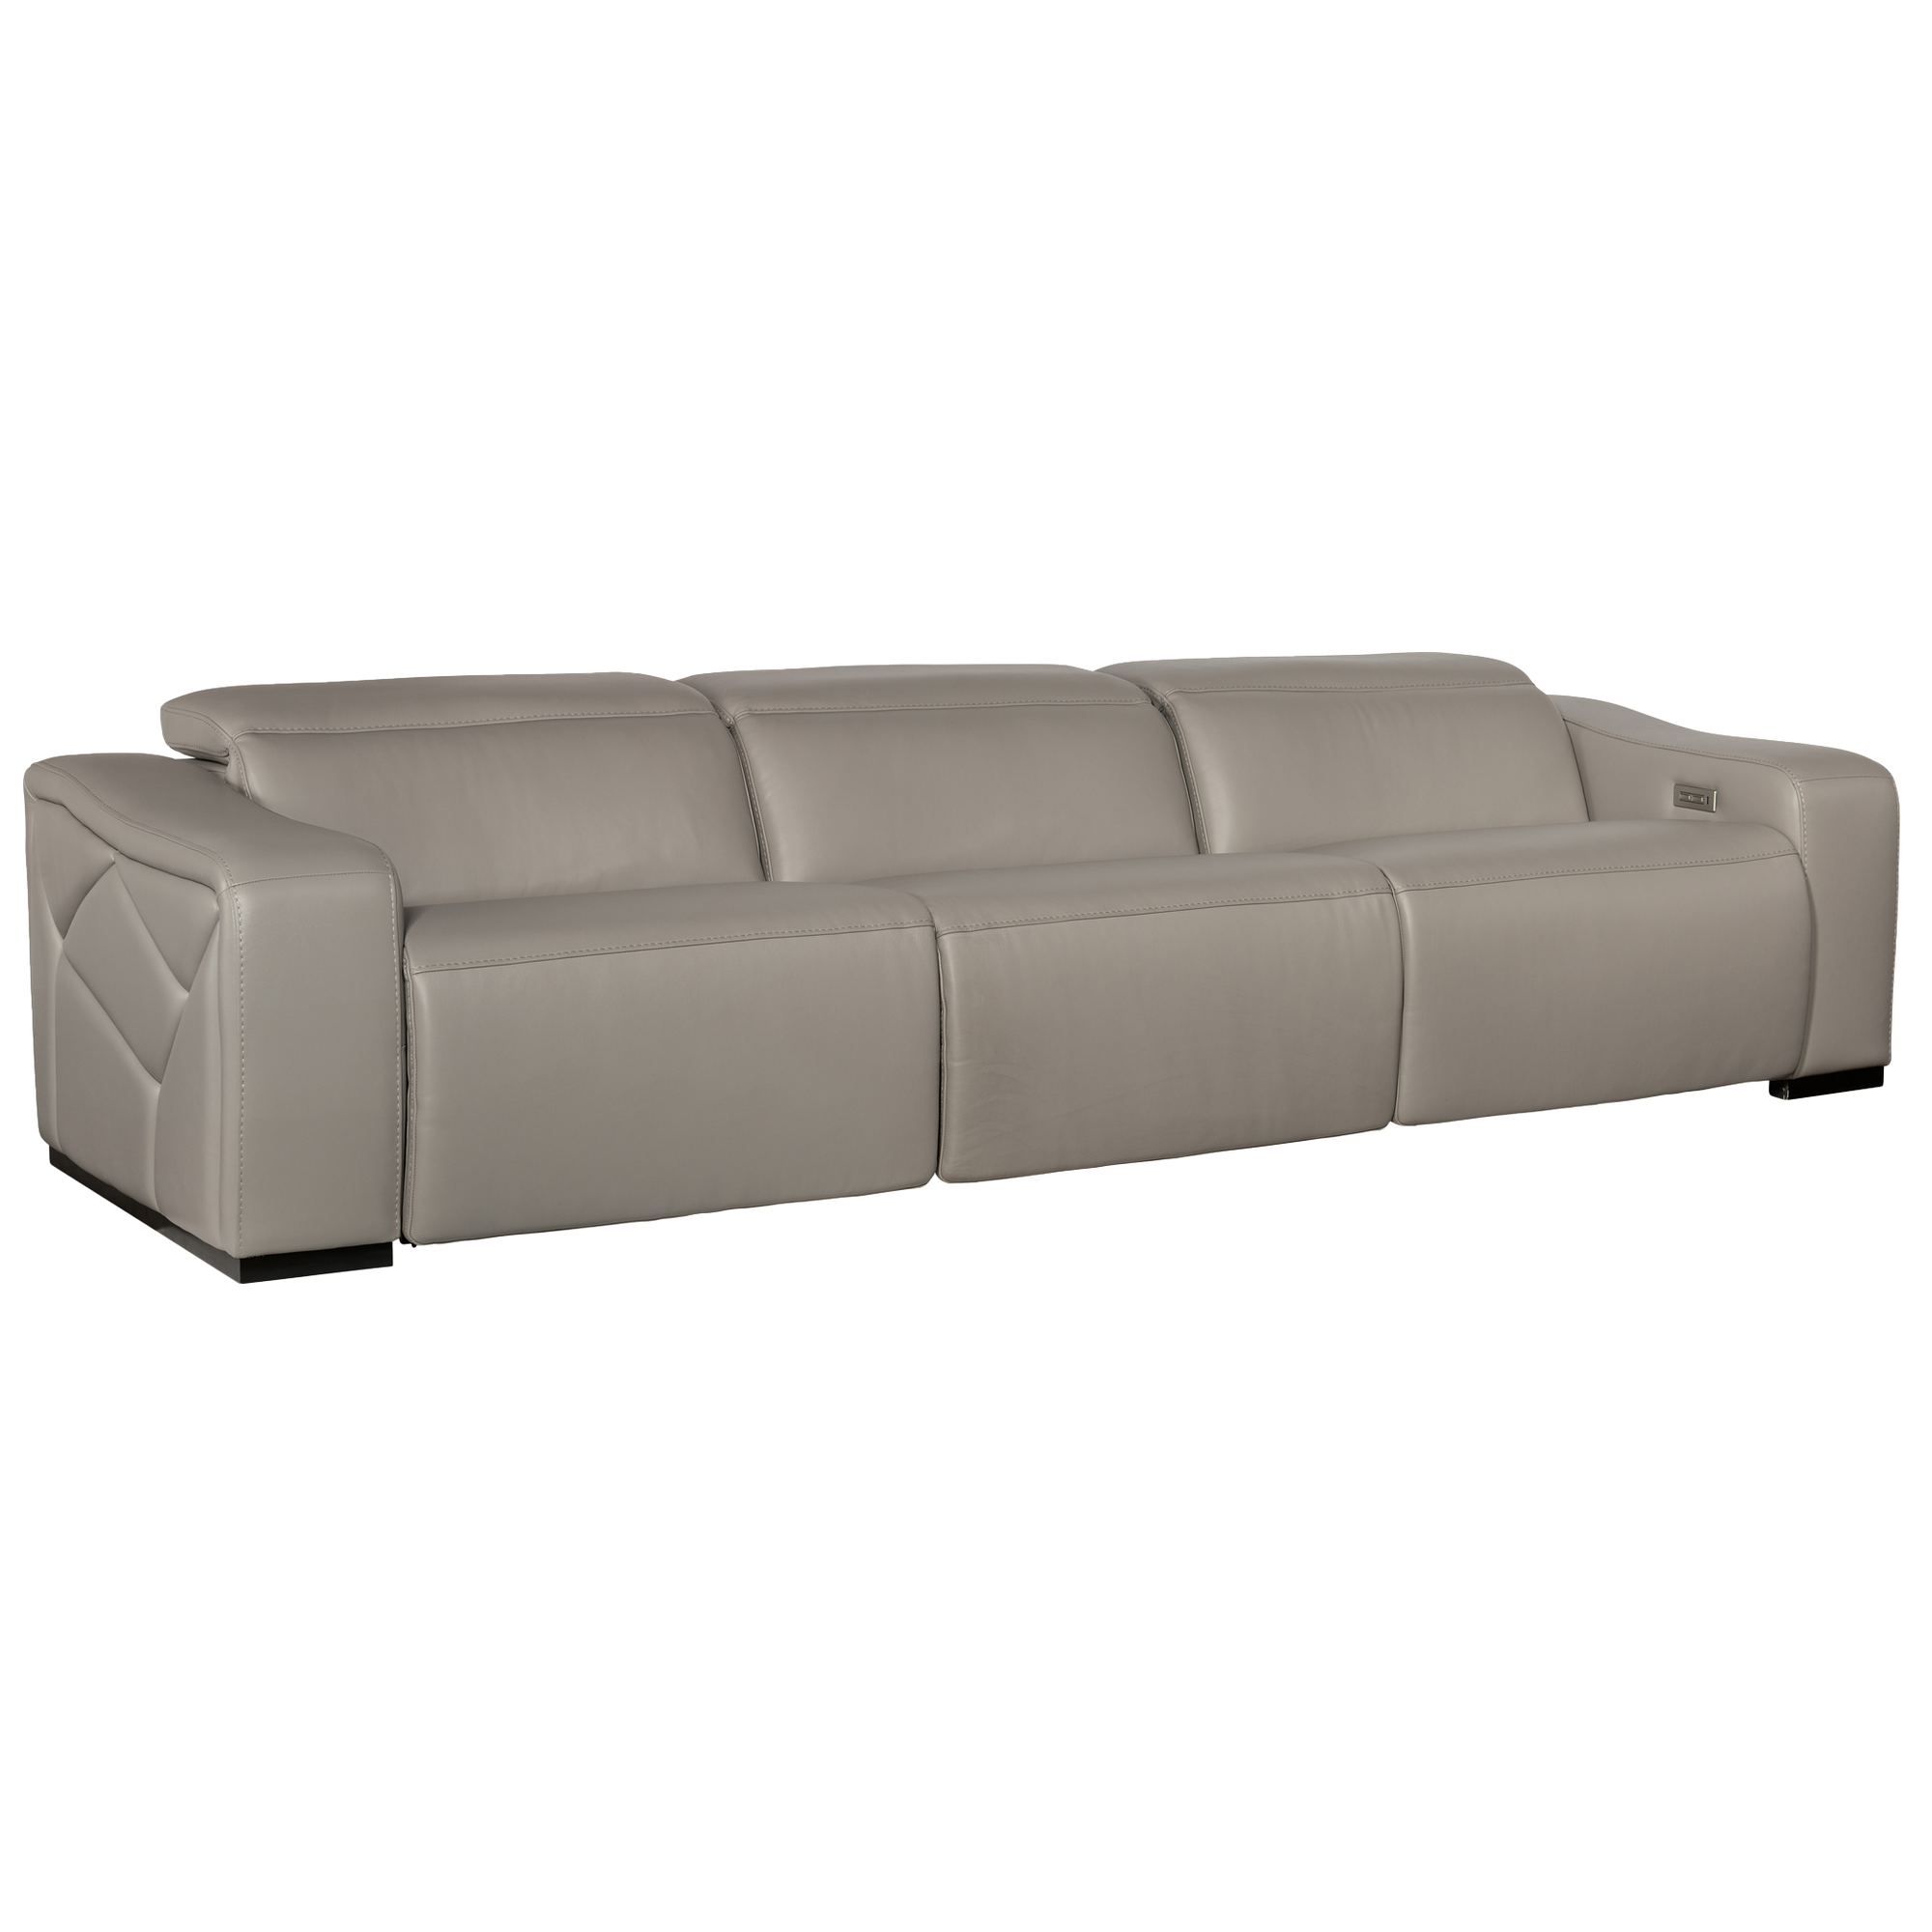 Otilla 123.5" Wide Upholstered Leather Sofa, Gray